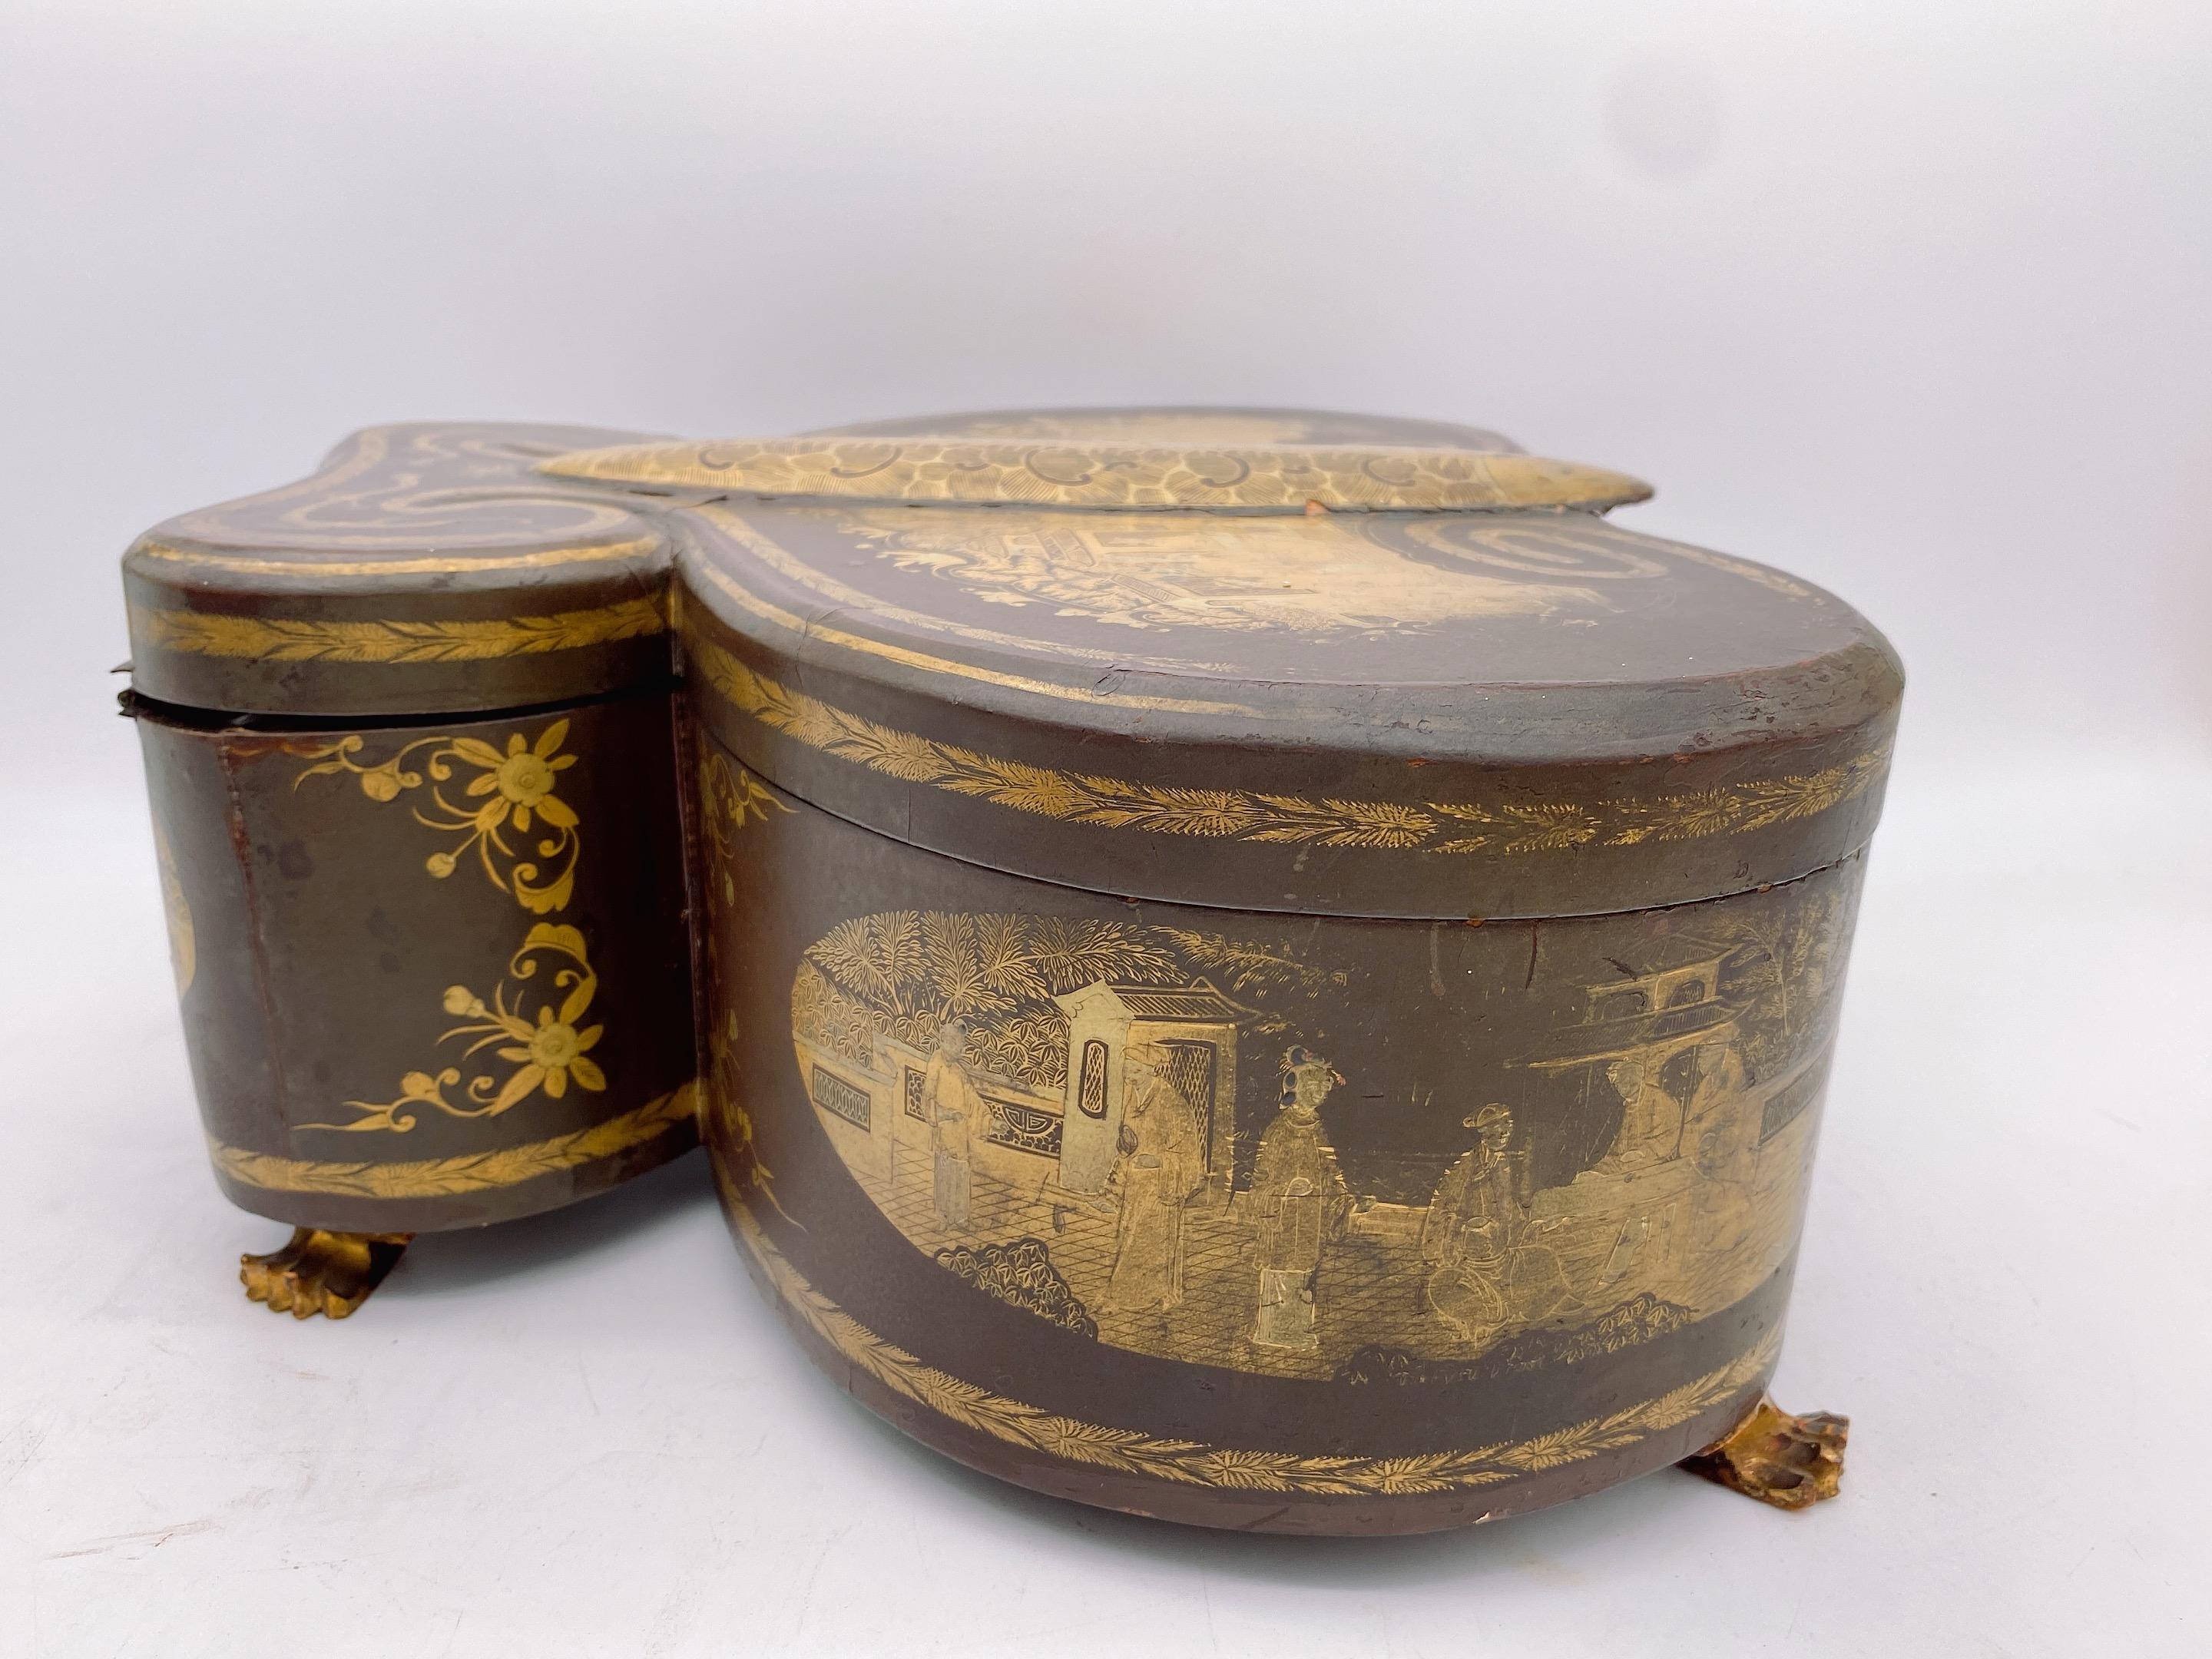 Rare 19th Century Antique Chinese Gilt Lacquer Butterfly Cased Pewter Tea Caddy For Sale 1